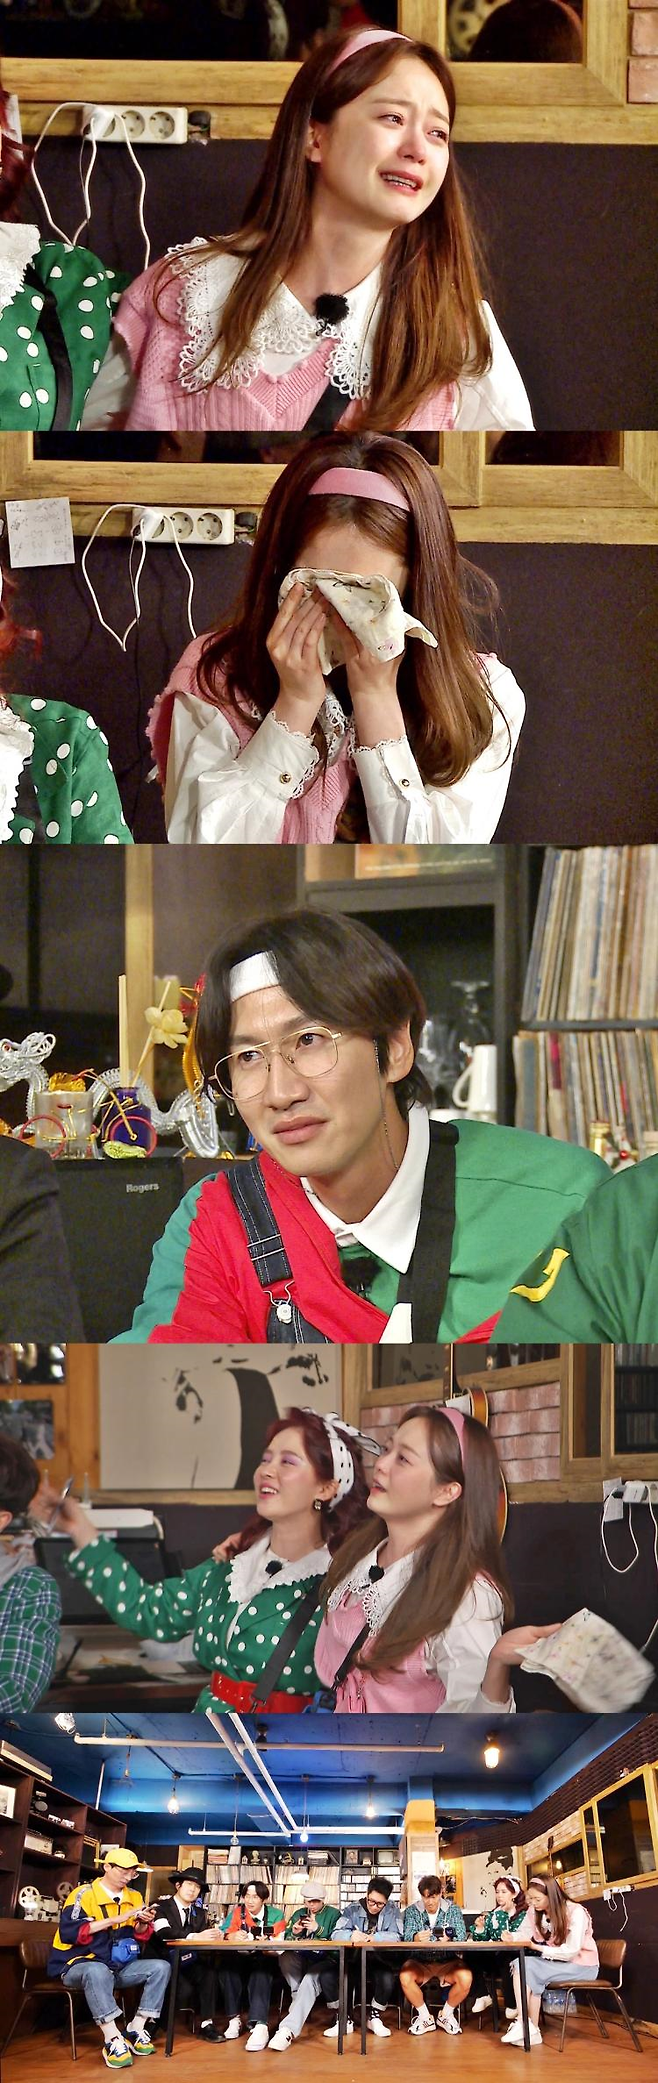 Lee Kwang-soo will unveil the past history hidden by the members.On SBSs Running Man, which will be broadcast on May 2, the story of Jeon So-mins sudden tears during the recording will be revealed.The members conducted a mission at the LP bar where the emotions of the 90s were buried, and submitted the stories and application songs that had been hidden.When Choi Ho-seops Mask of the Year, along with Kim Jong-guks story, When I was in school, I wanted to give up my dream of a singer on the contrary of my parents, came out, all the members were soaked in memories with their hands tightly held.At this time, Jeon So-min, the representative emotional worker of Running Man, said, Its a start again.In particular, I could not speak with the lyrics Do not forget and remember, but before the story was written, Jeon Sang-min recalled the past with a faint recollection of the past, saying, Memories ... I do not write one piece ... and made the members buzz by revealing a meaningful love story with the song Have you ever drank angels and coffee?On the other hand, on this day, the story of Yang Se-chan, who had a big fire in his childhood, Lee Kwang-soo, who wants to be a good mother, and Hahas childhood, which was exceptionally introspective, attracted attention.The reason why Jeon So-min, a Love Frog, shed tears and the members past history will be revealed at Running Man, which will air at 5 p.m. on the 2nd of next month.